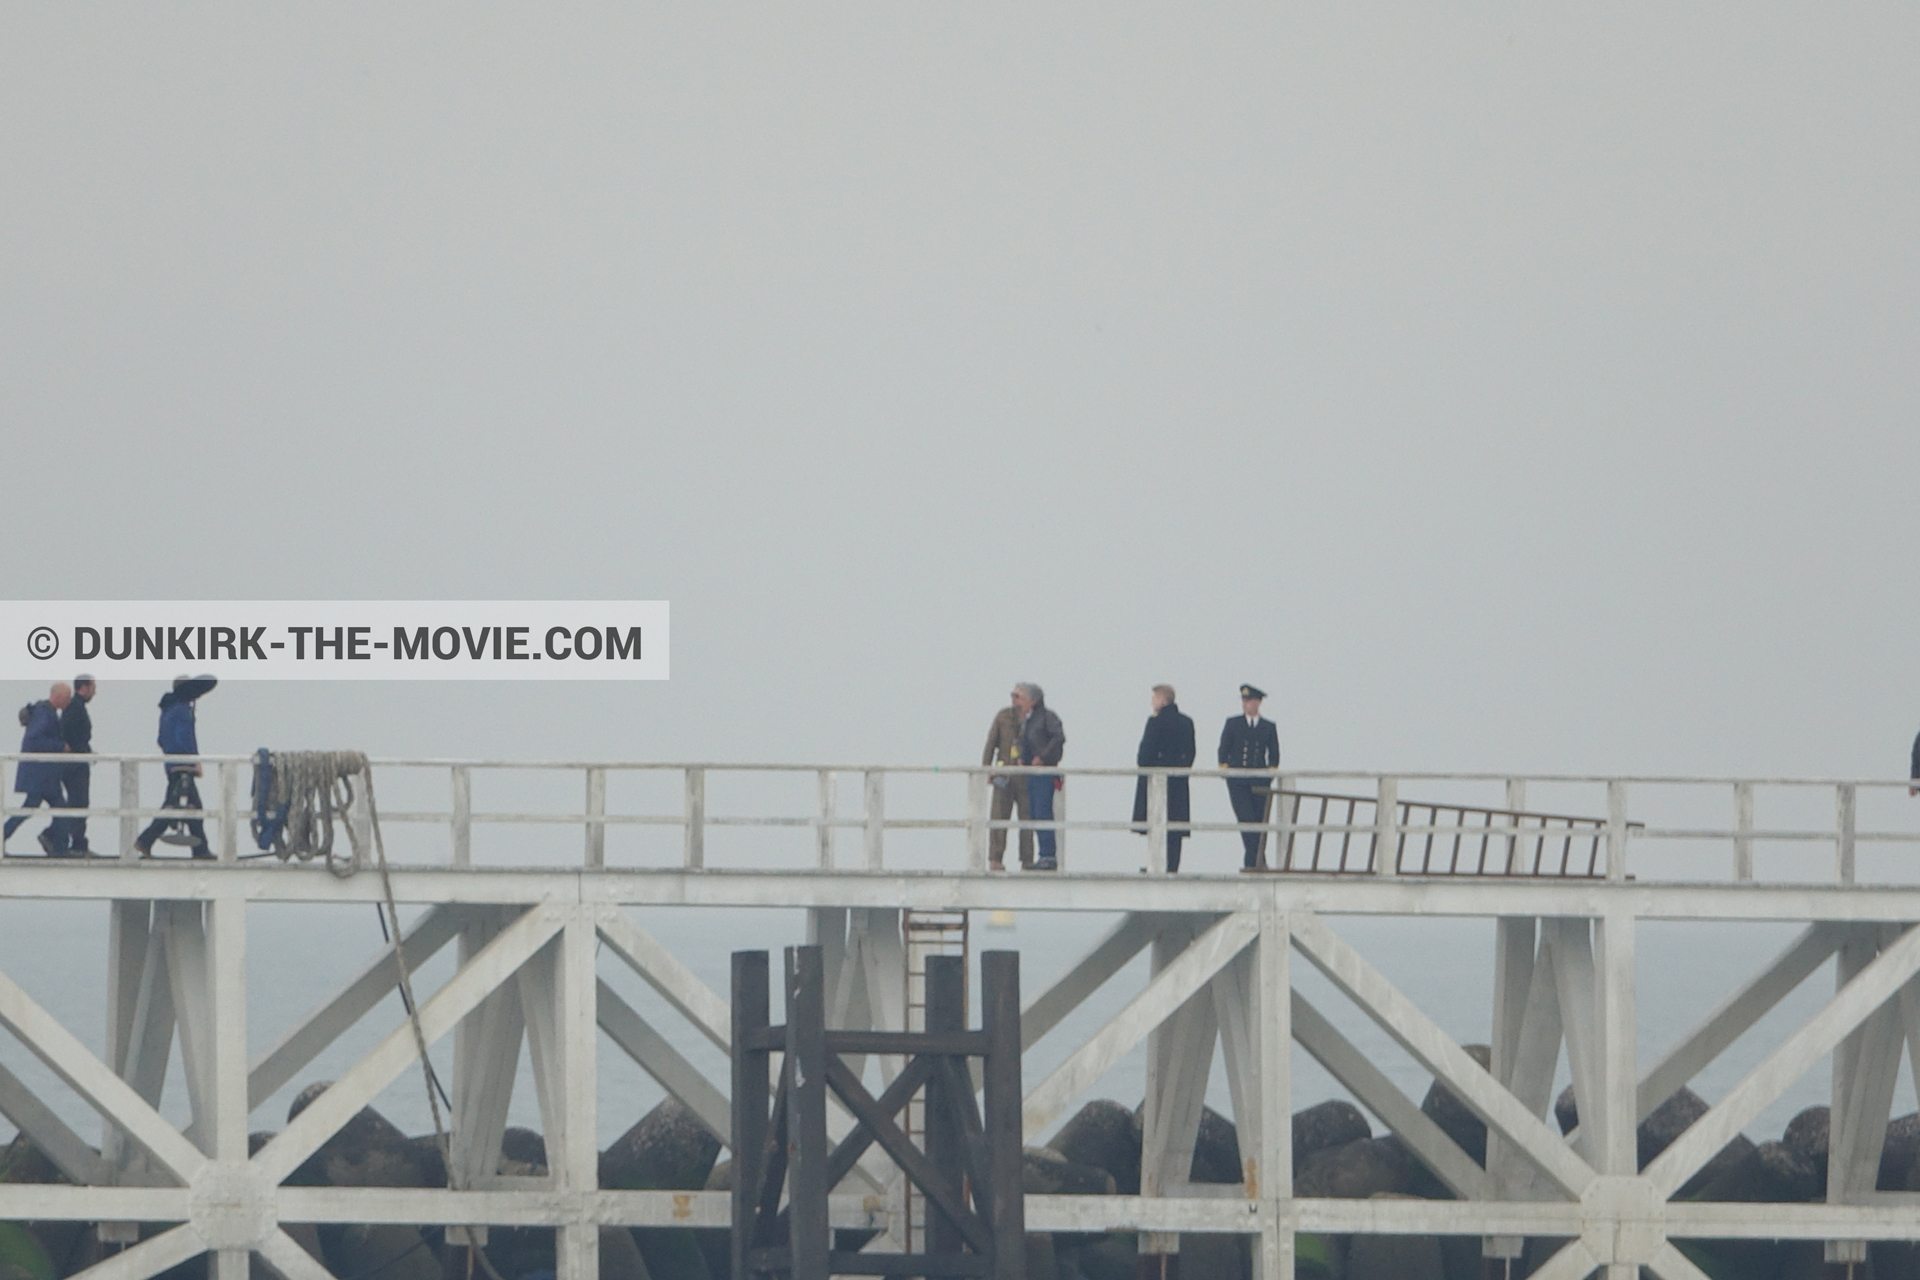 Picture with actor, grey sky, EST pier, Kenneth Branagh, technical team, Nilo Otero,  from behind the scene of the Dunkirk movie by Nolan